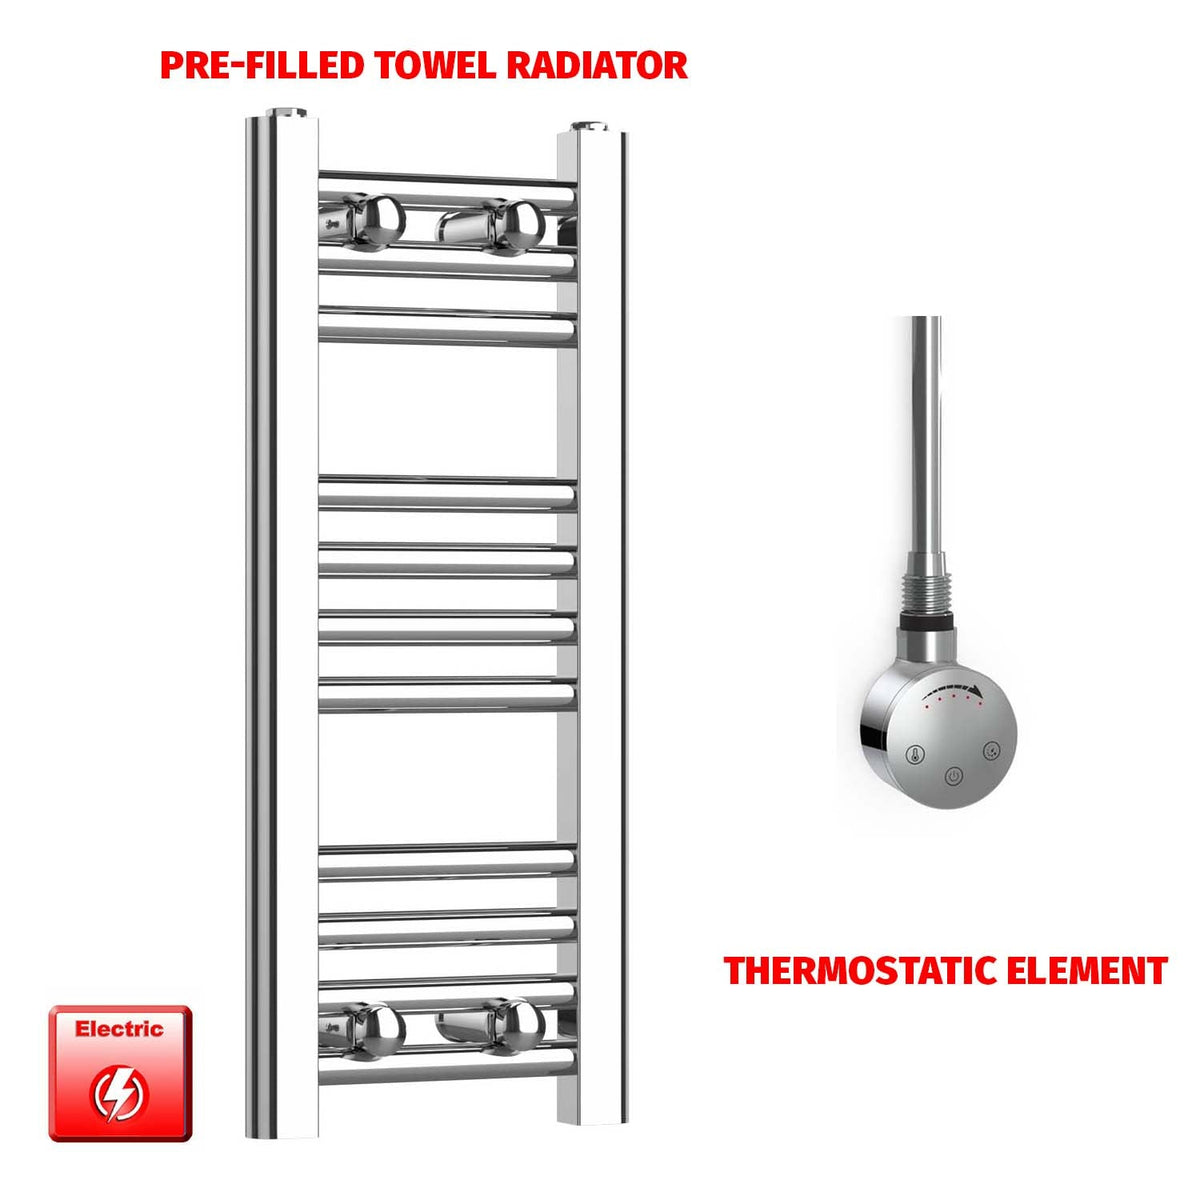 600mm High 200mm Wide Pre-Filled Electric Heated Towel Rail Radiator Straight Chrome Smart Thermostatic Element No Timer